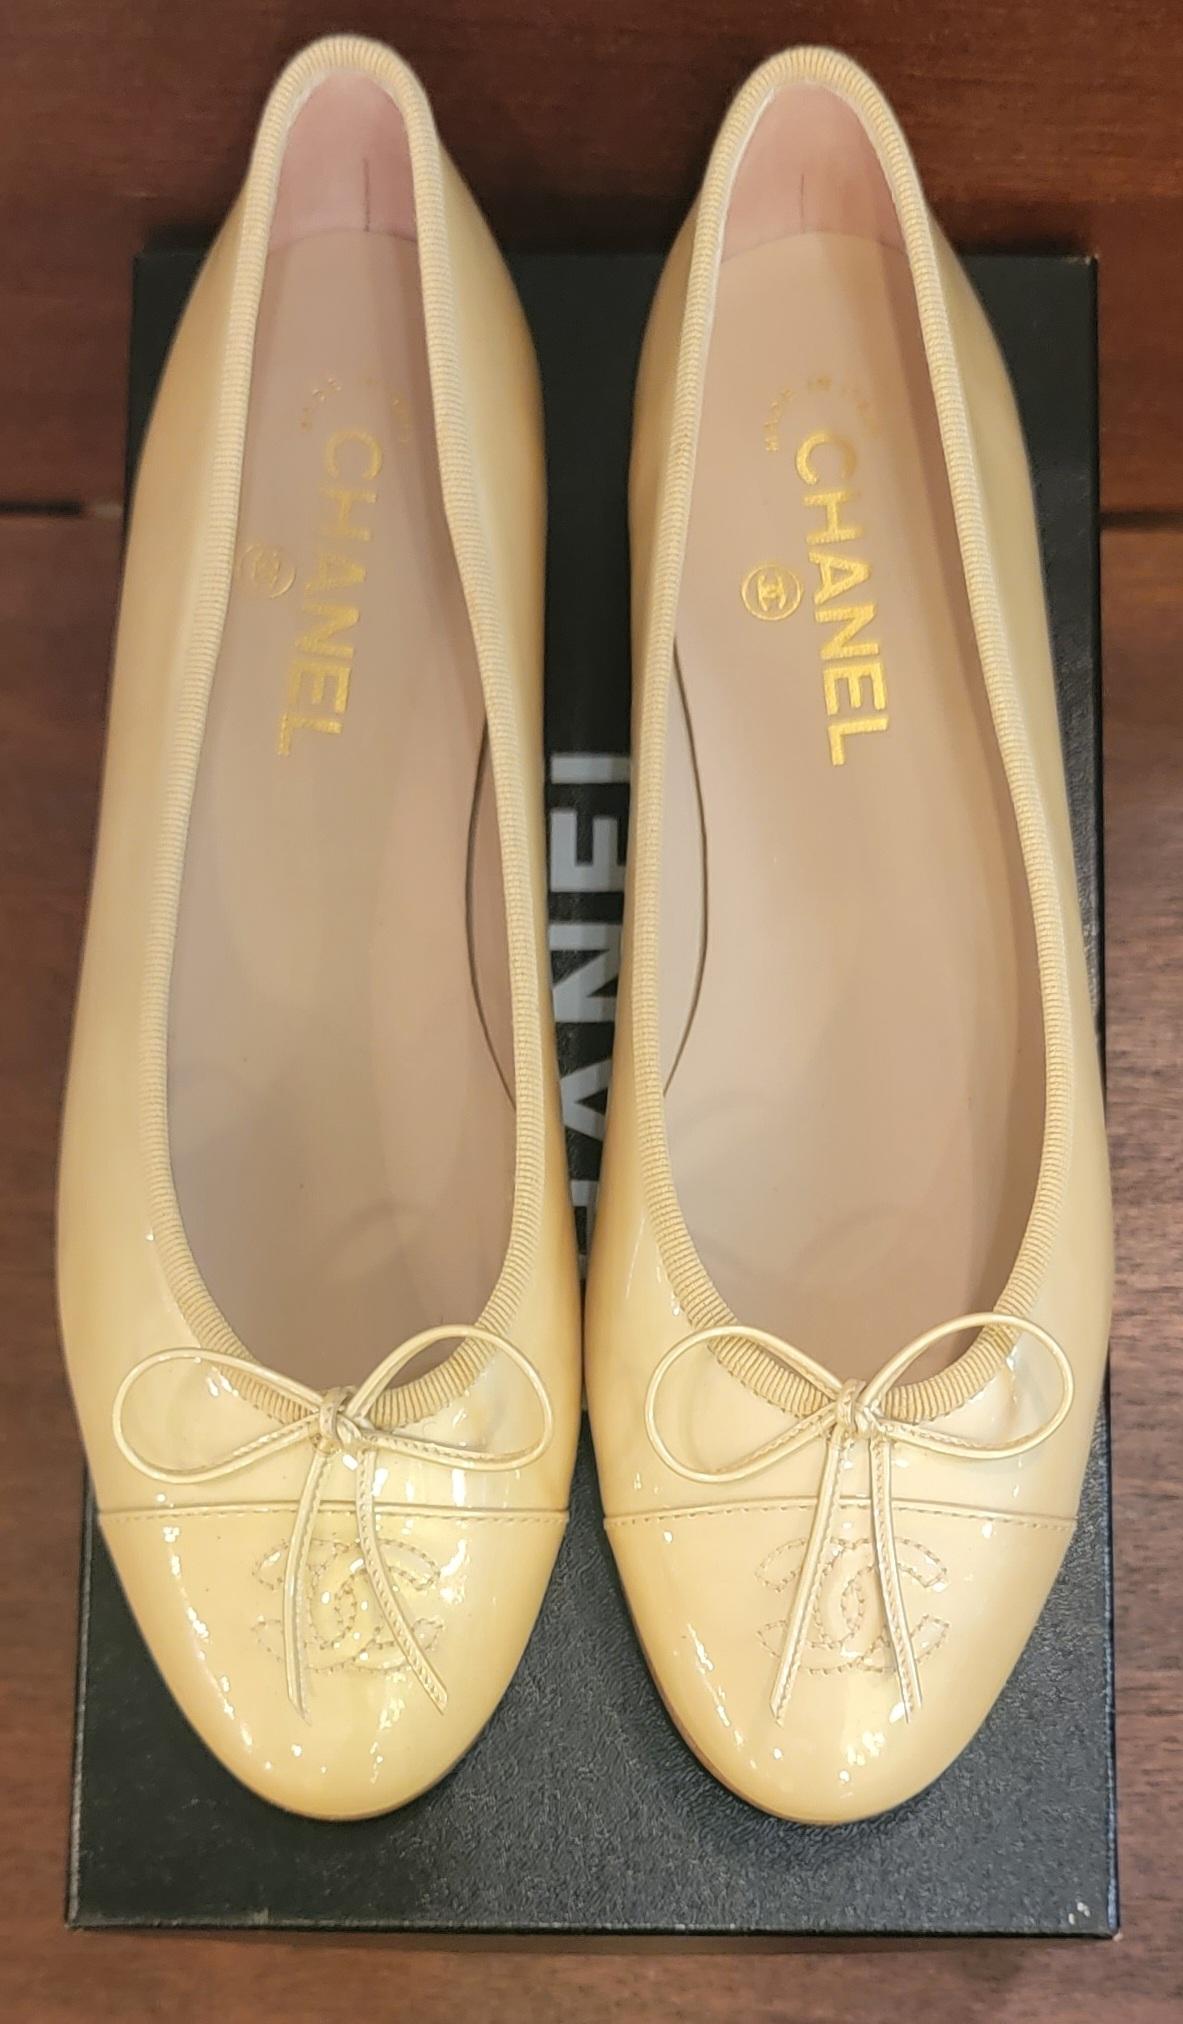 Rare Brand New Chanel Ballerina Size 39 Tan Bow Tie Shoes In New Condition For Sale In Pasadena, CA